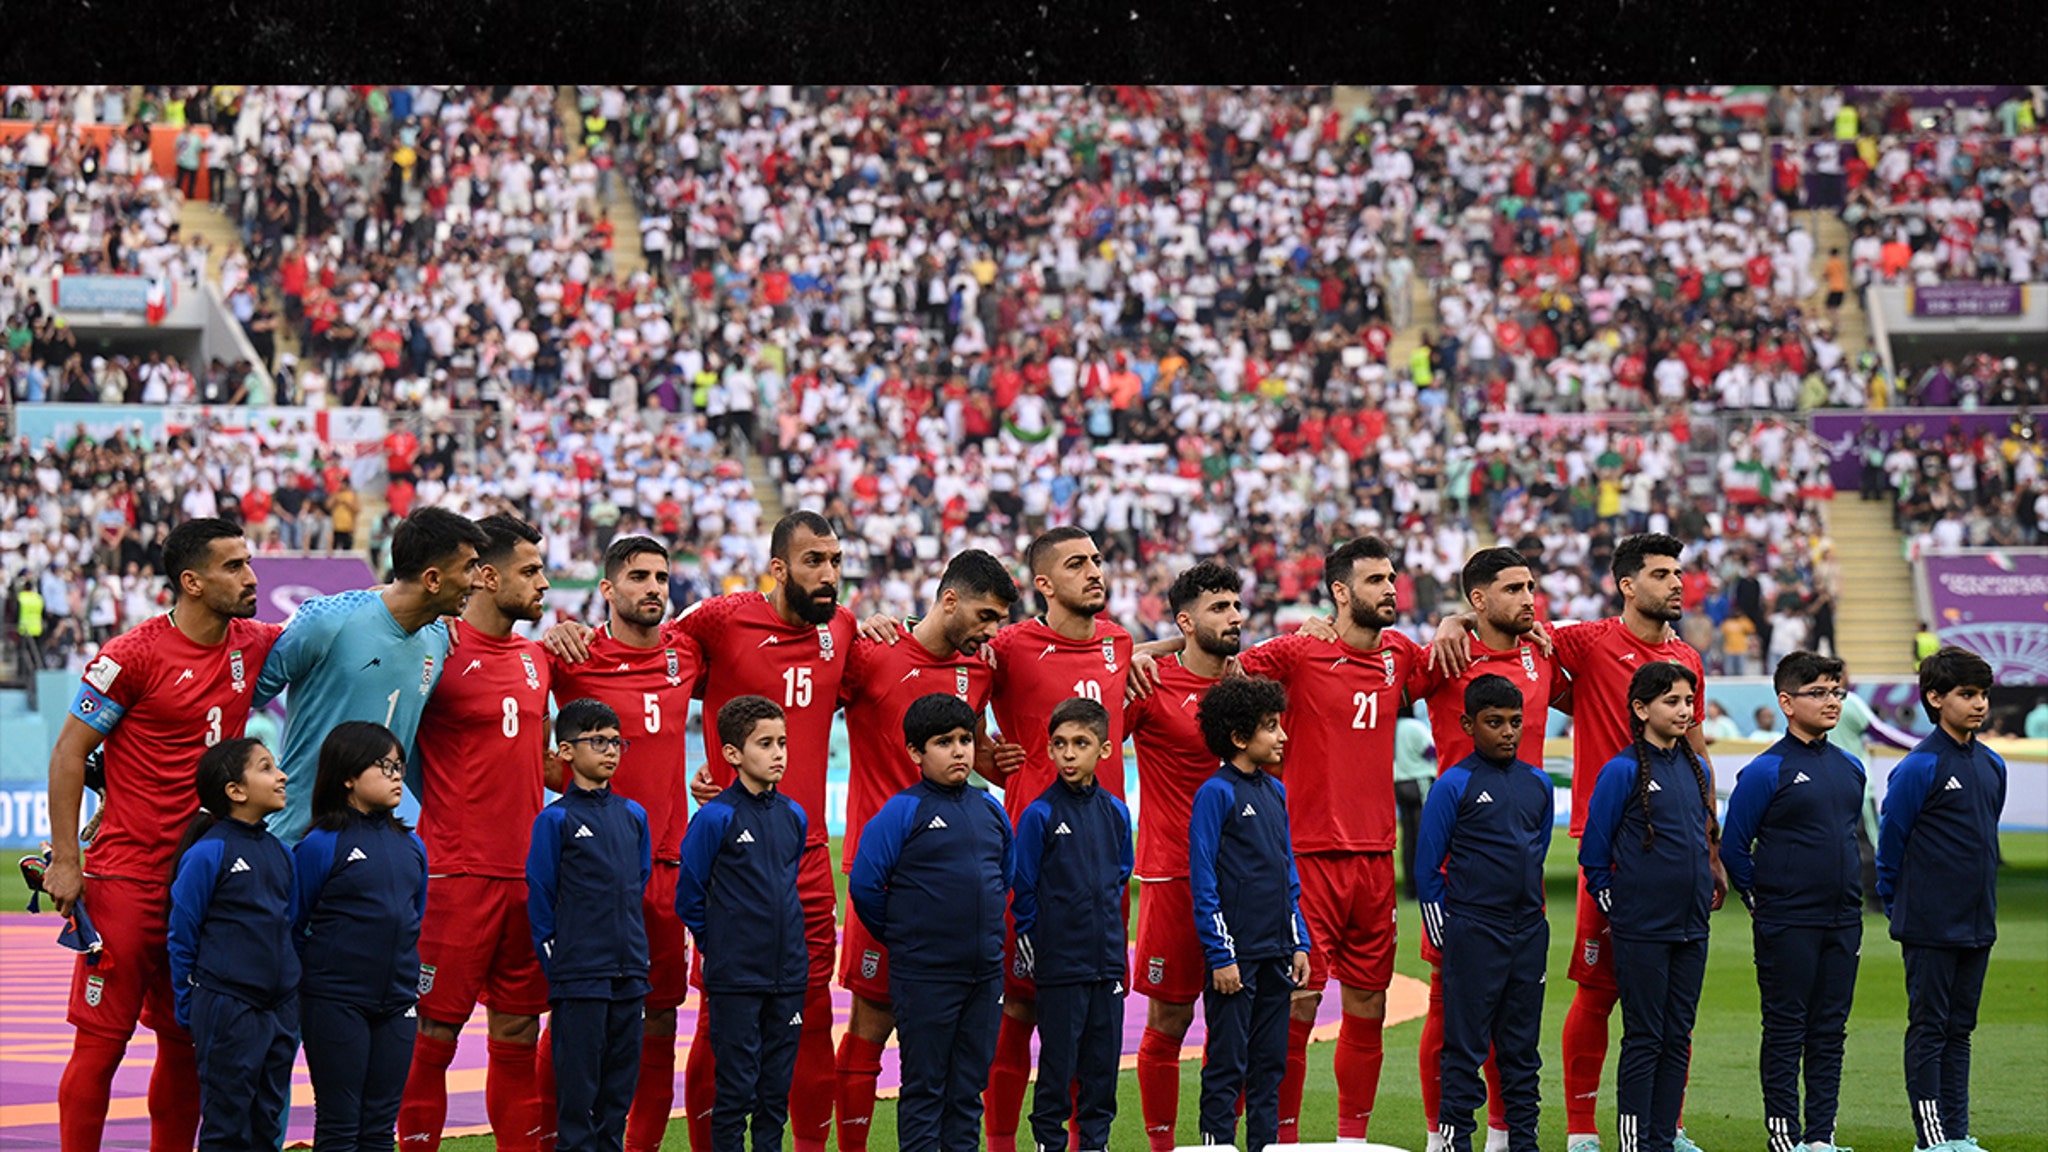 Iran Soccer Players Could Face Arrests, Beatings Upon World Cup Return, Experts ..